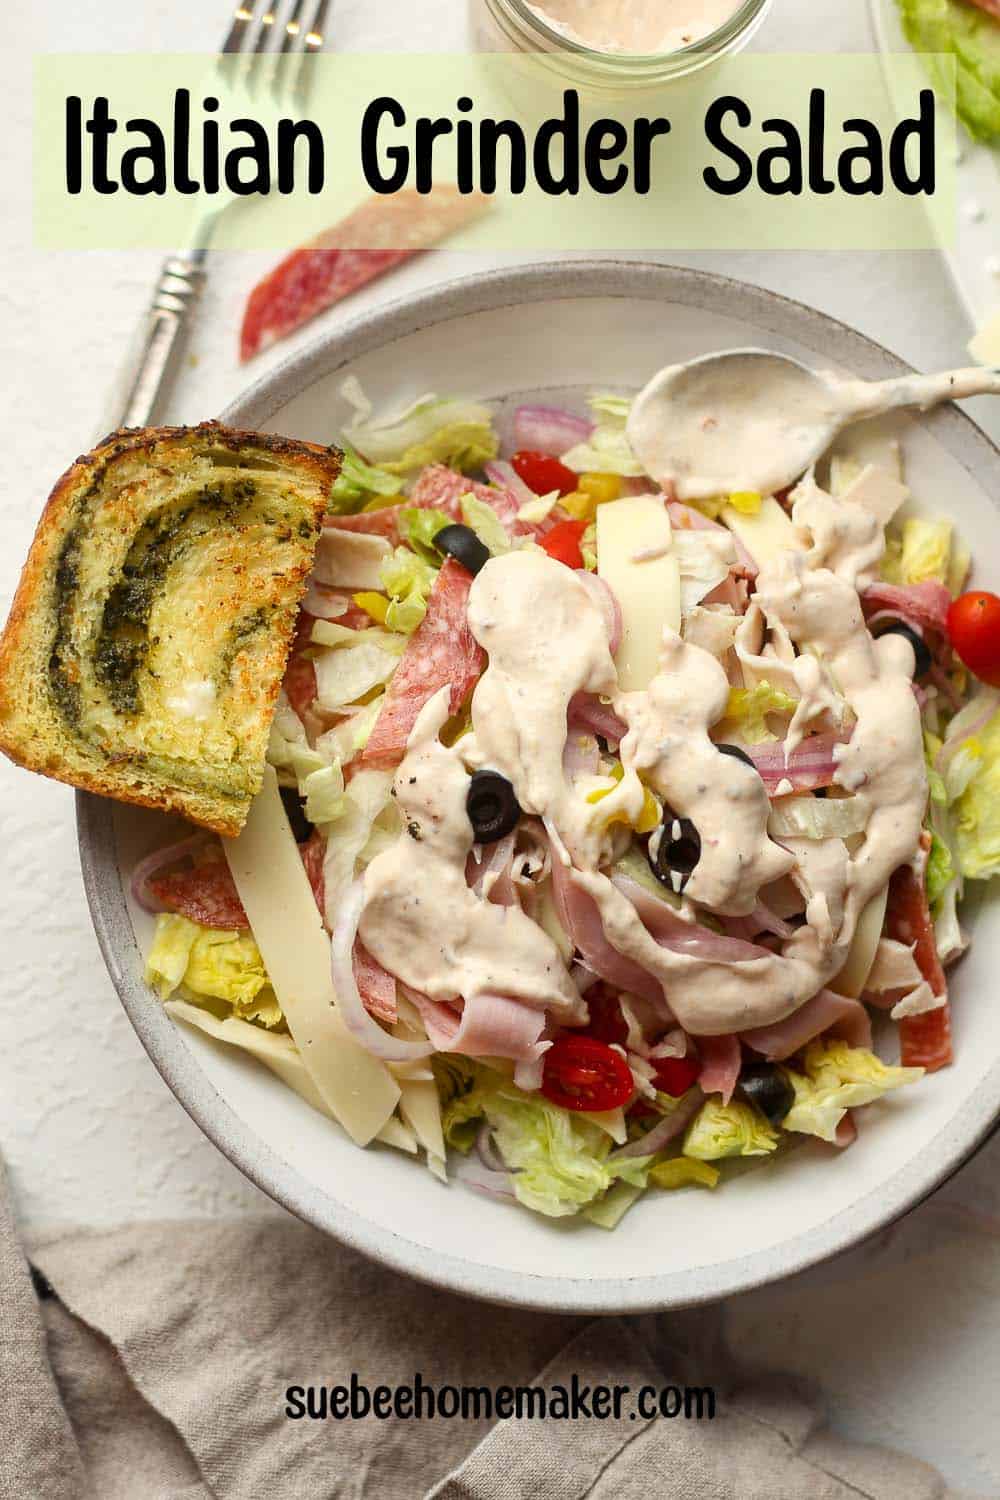 A bowl of Italian grinder salad with creamy dressing drizzled on top.